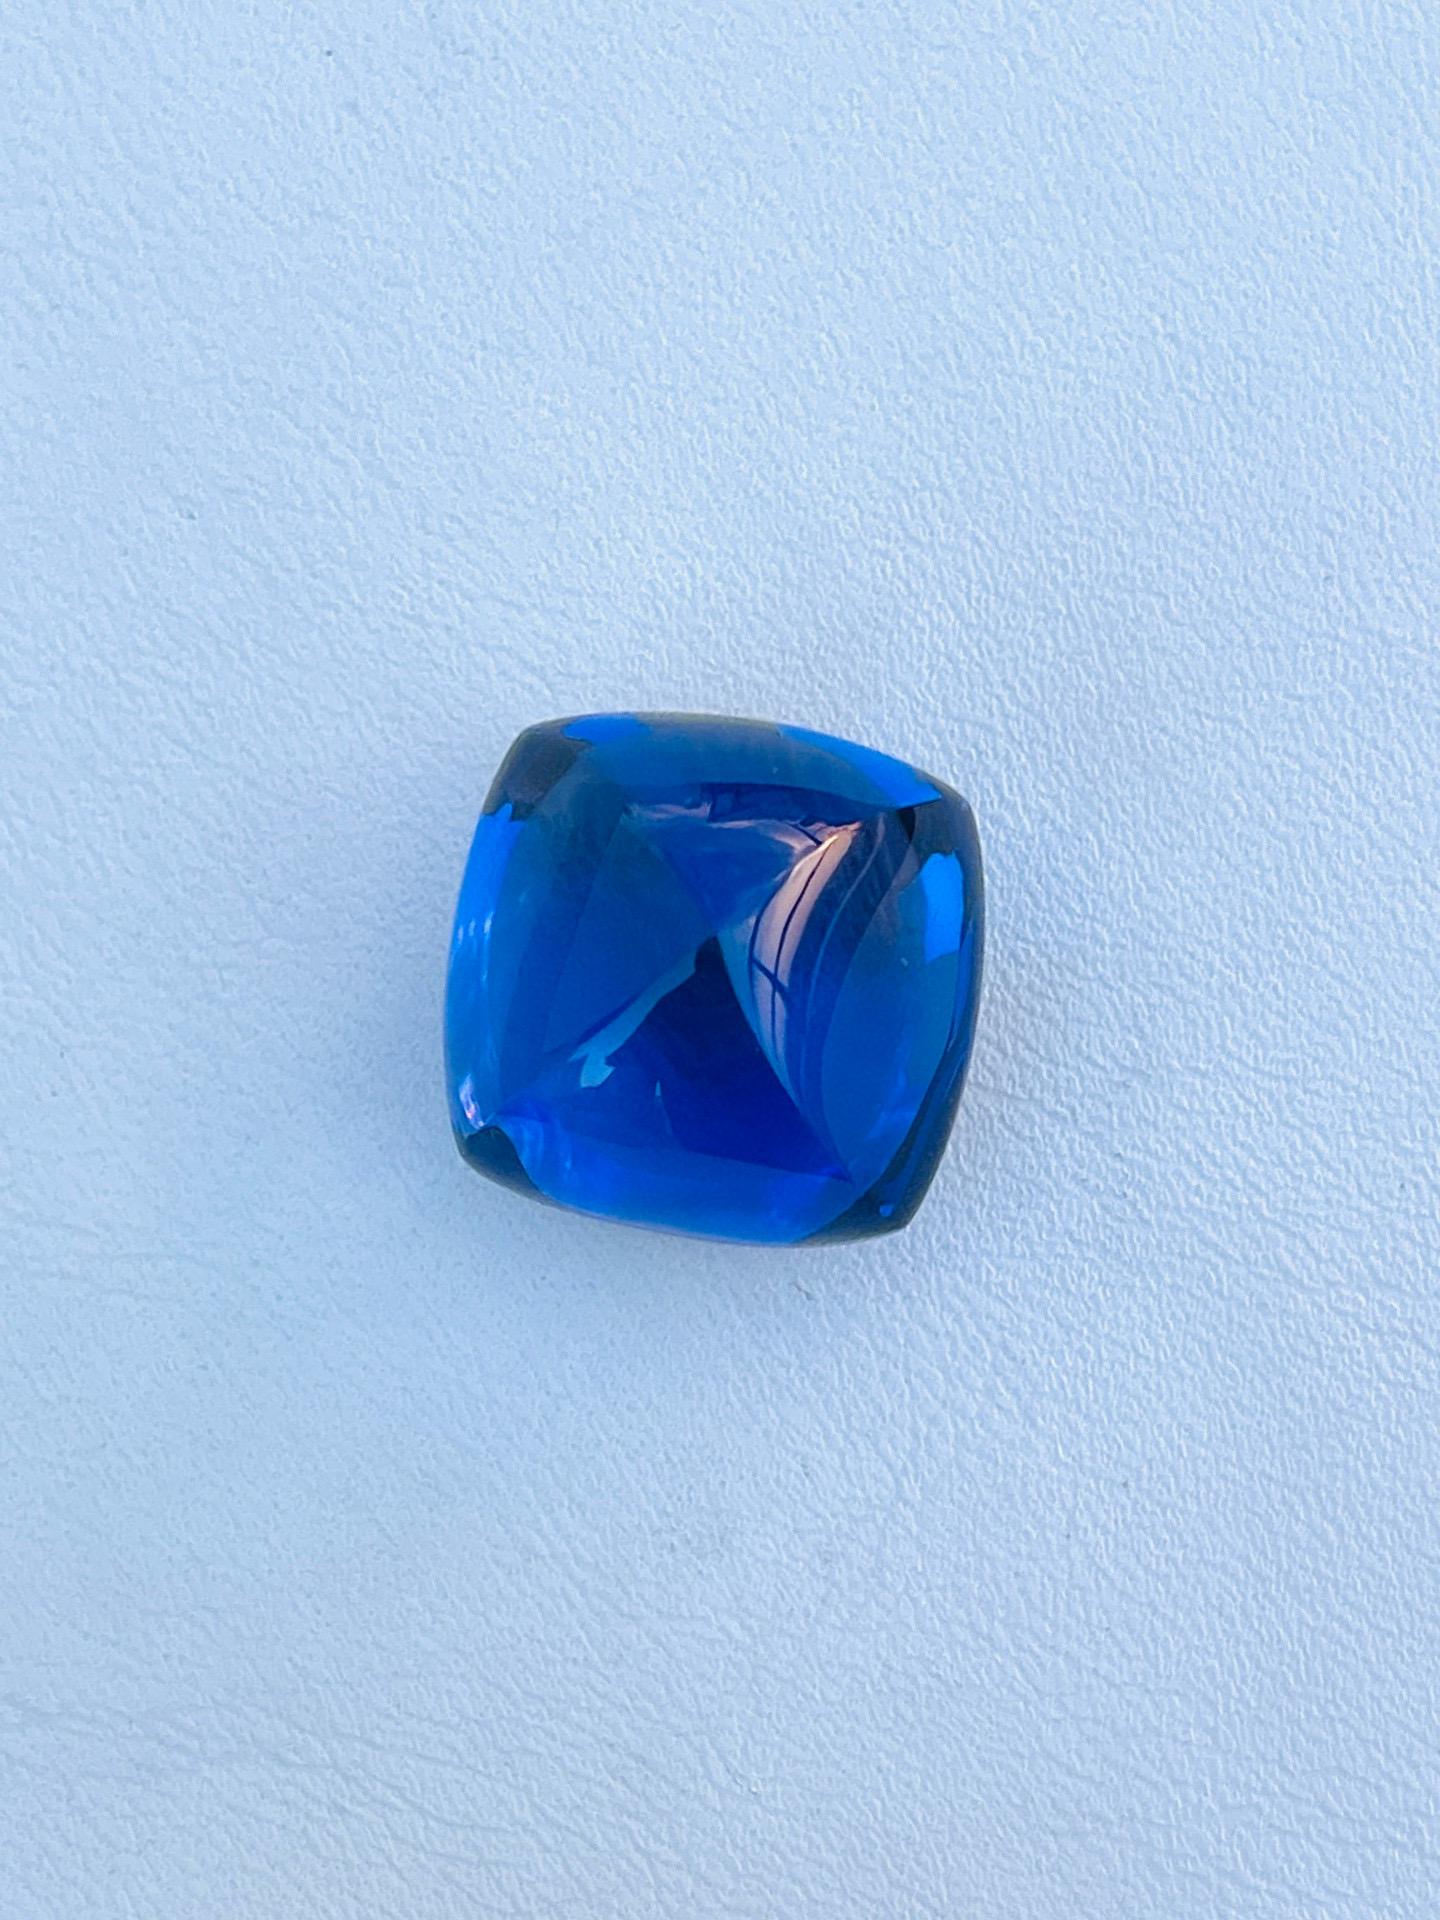 Cabochon collection tanzanite 41.81ct royal blue cabochon 100% clean gemstone  For Sale